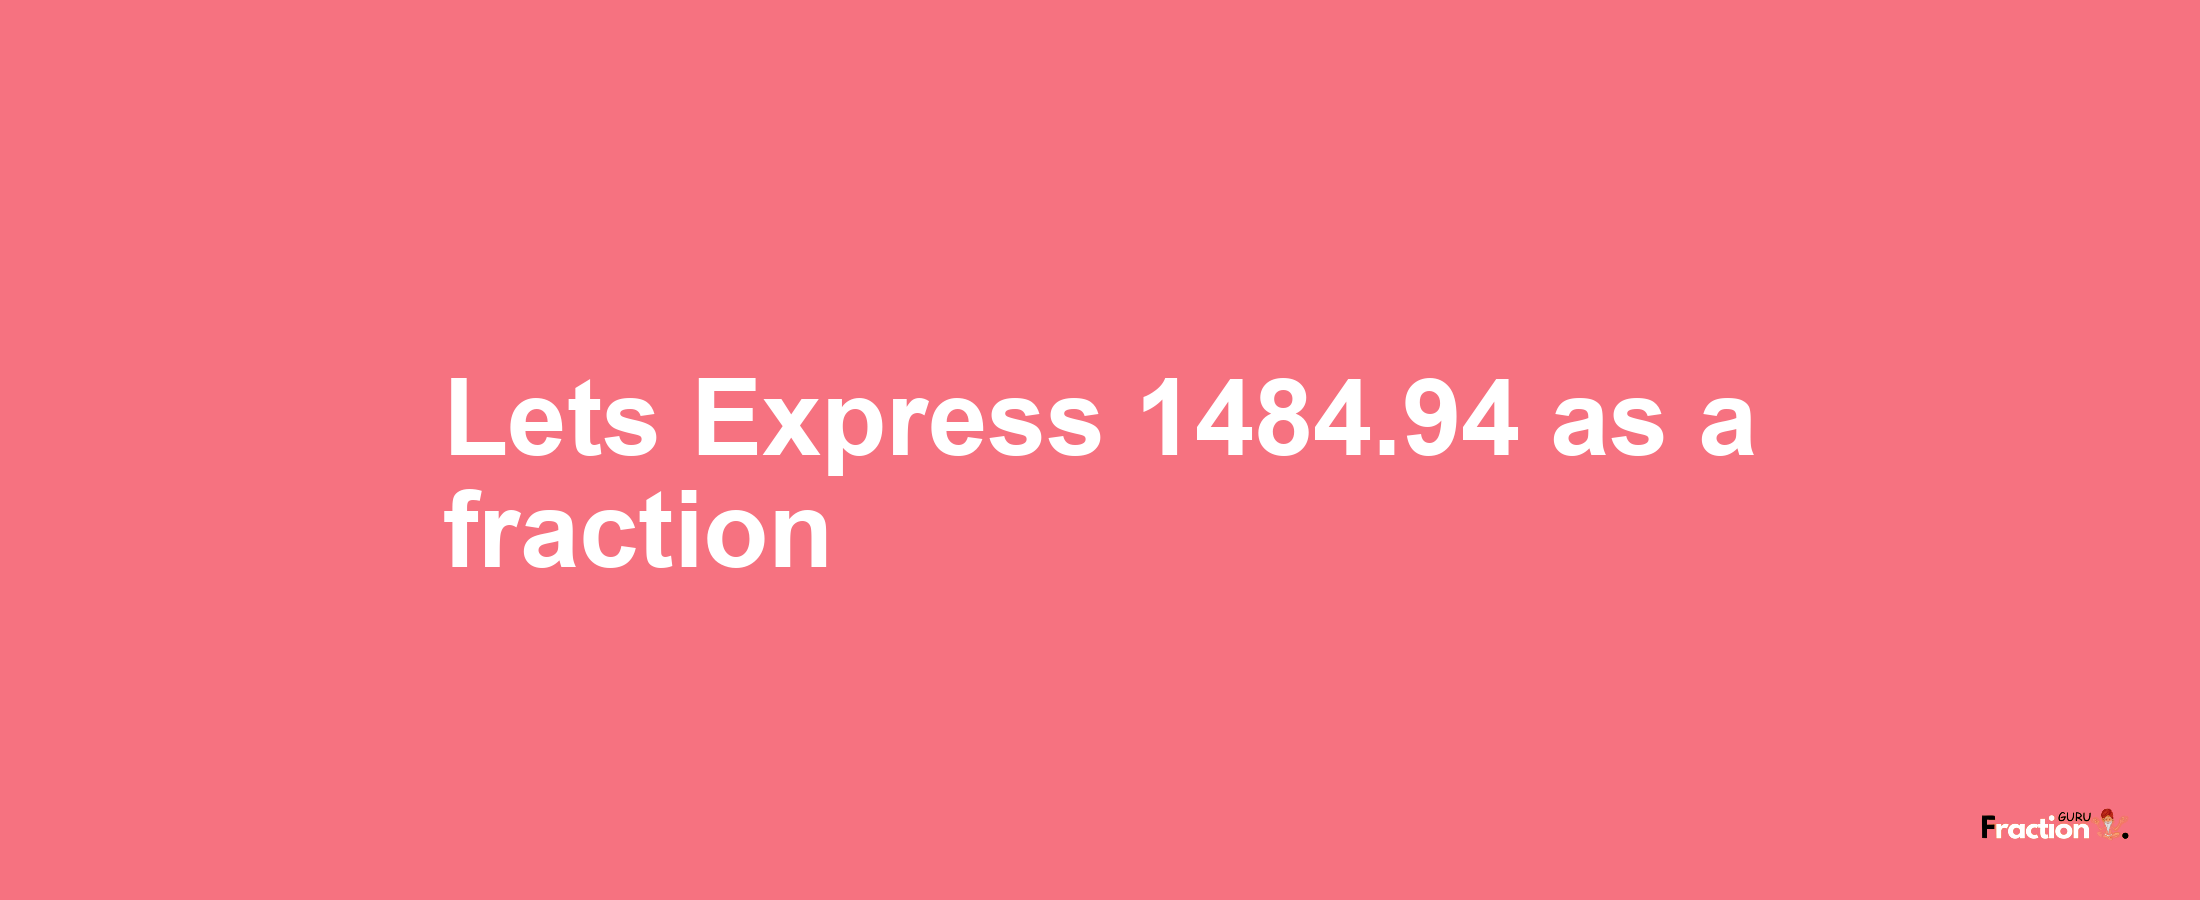 Lets Express 1484.94 as afraction